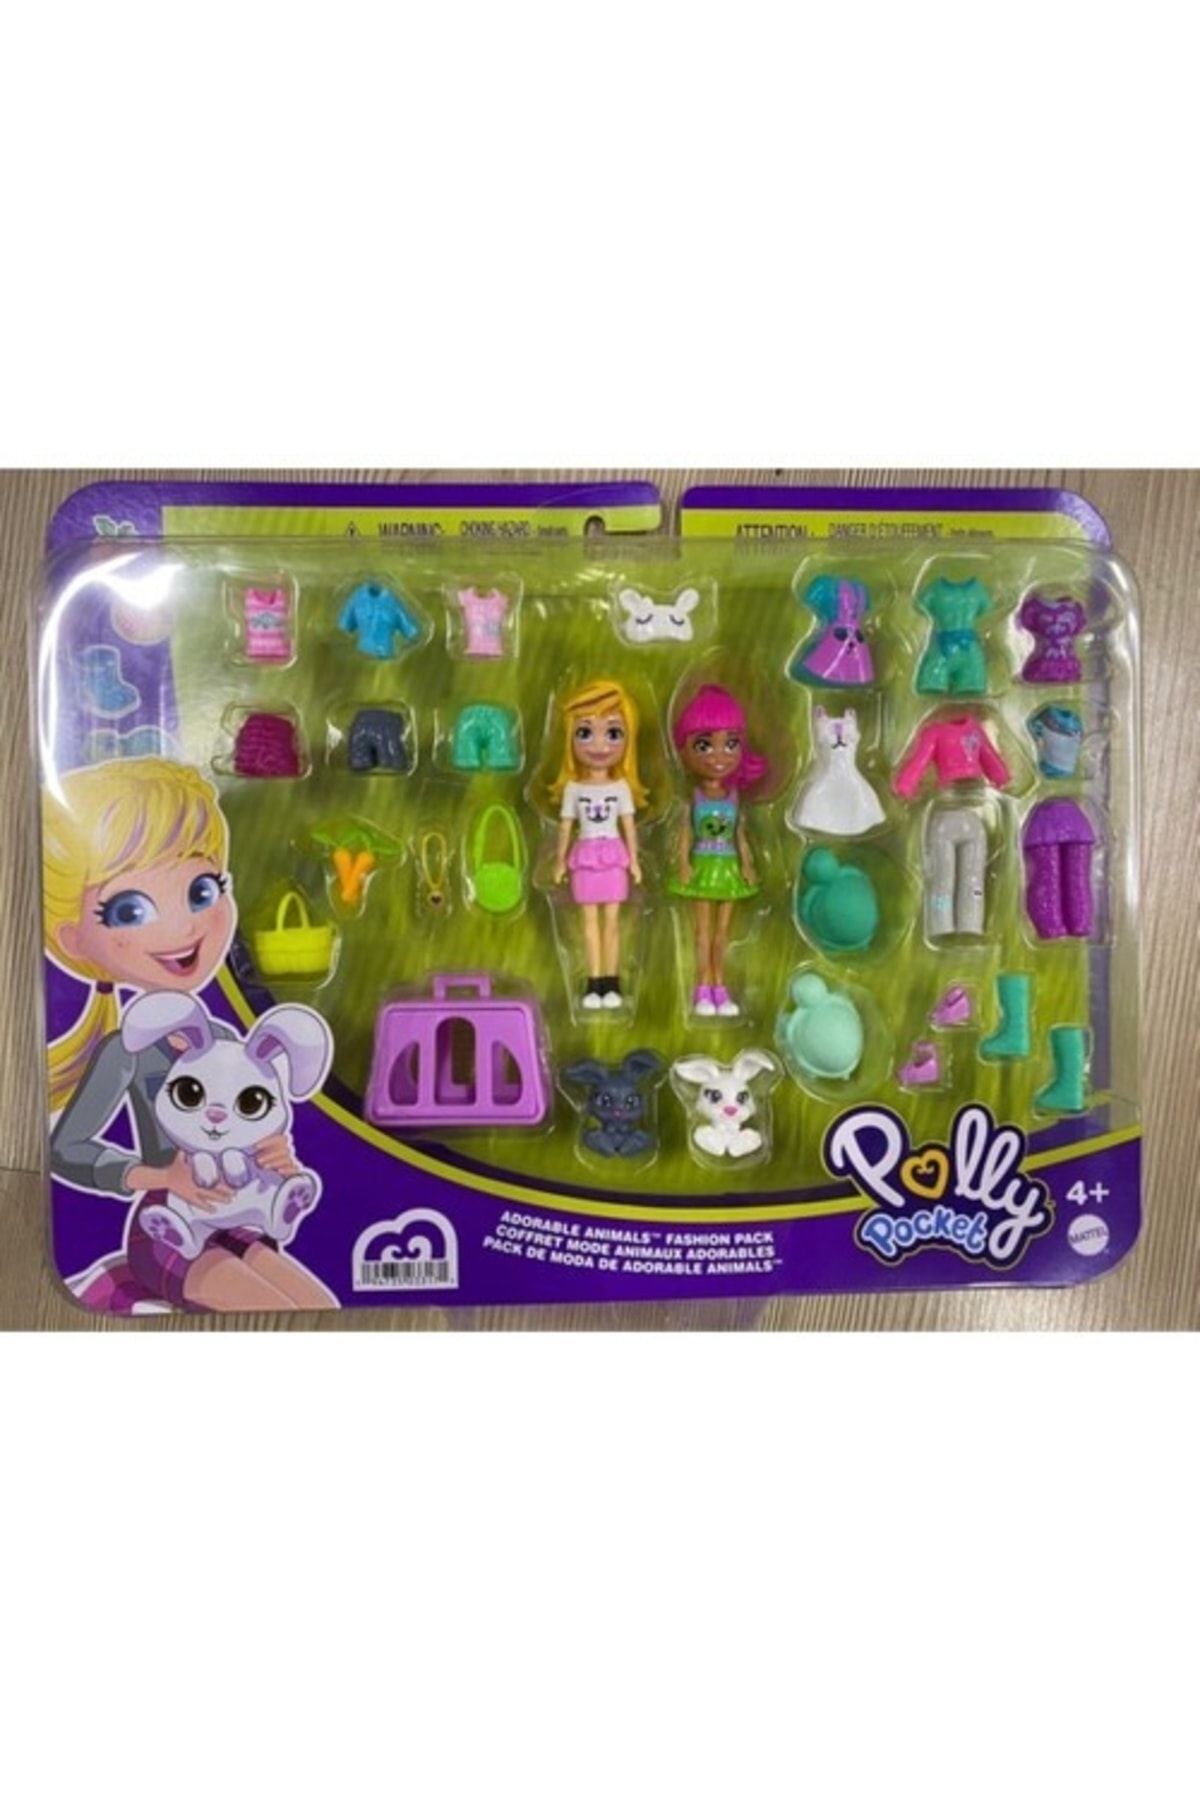 Coffret polly pocket chat - Cdiscount